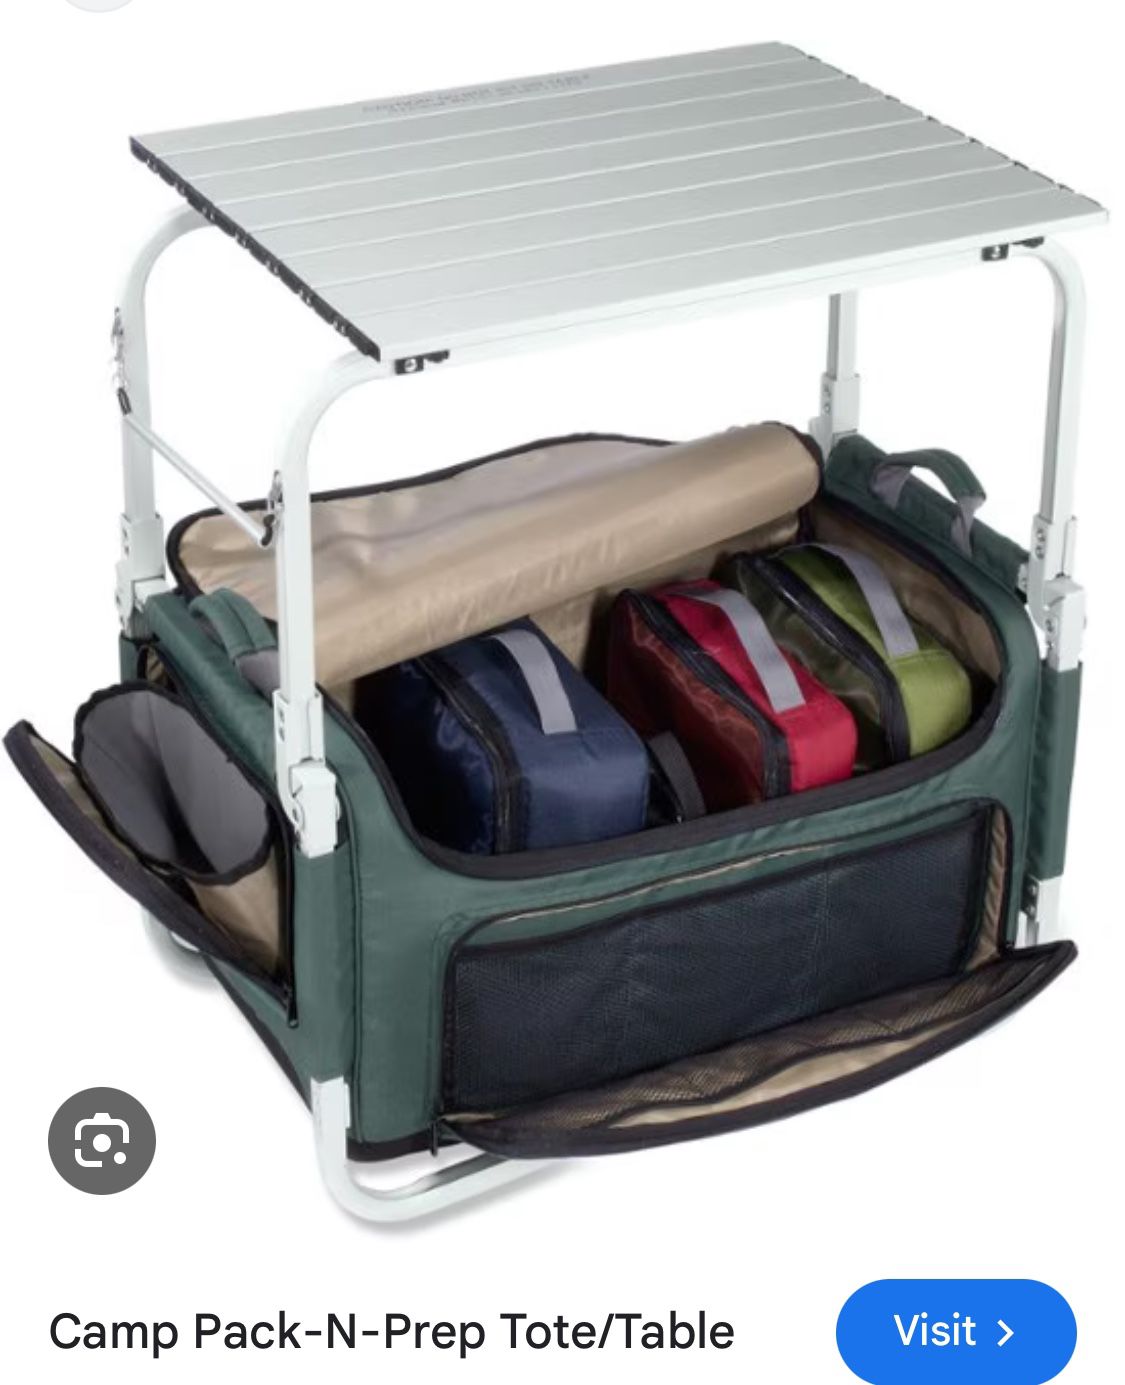 Camp Kitchen Aluminum Table And Cooler From Rei